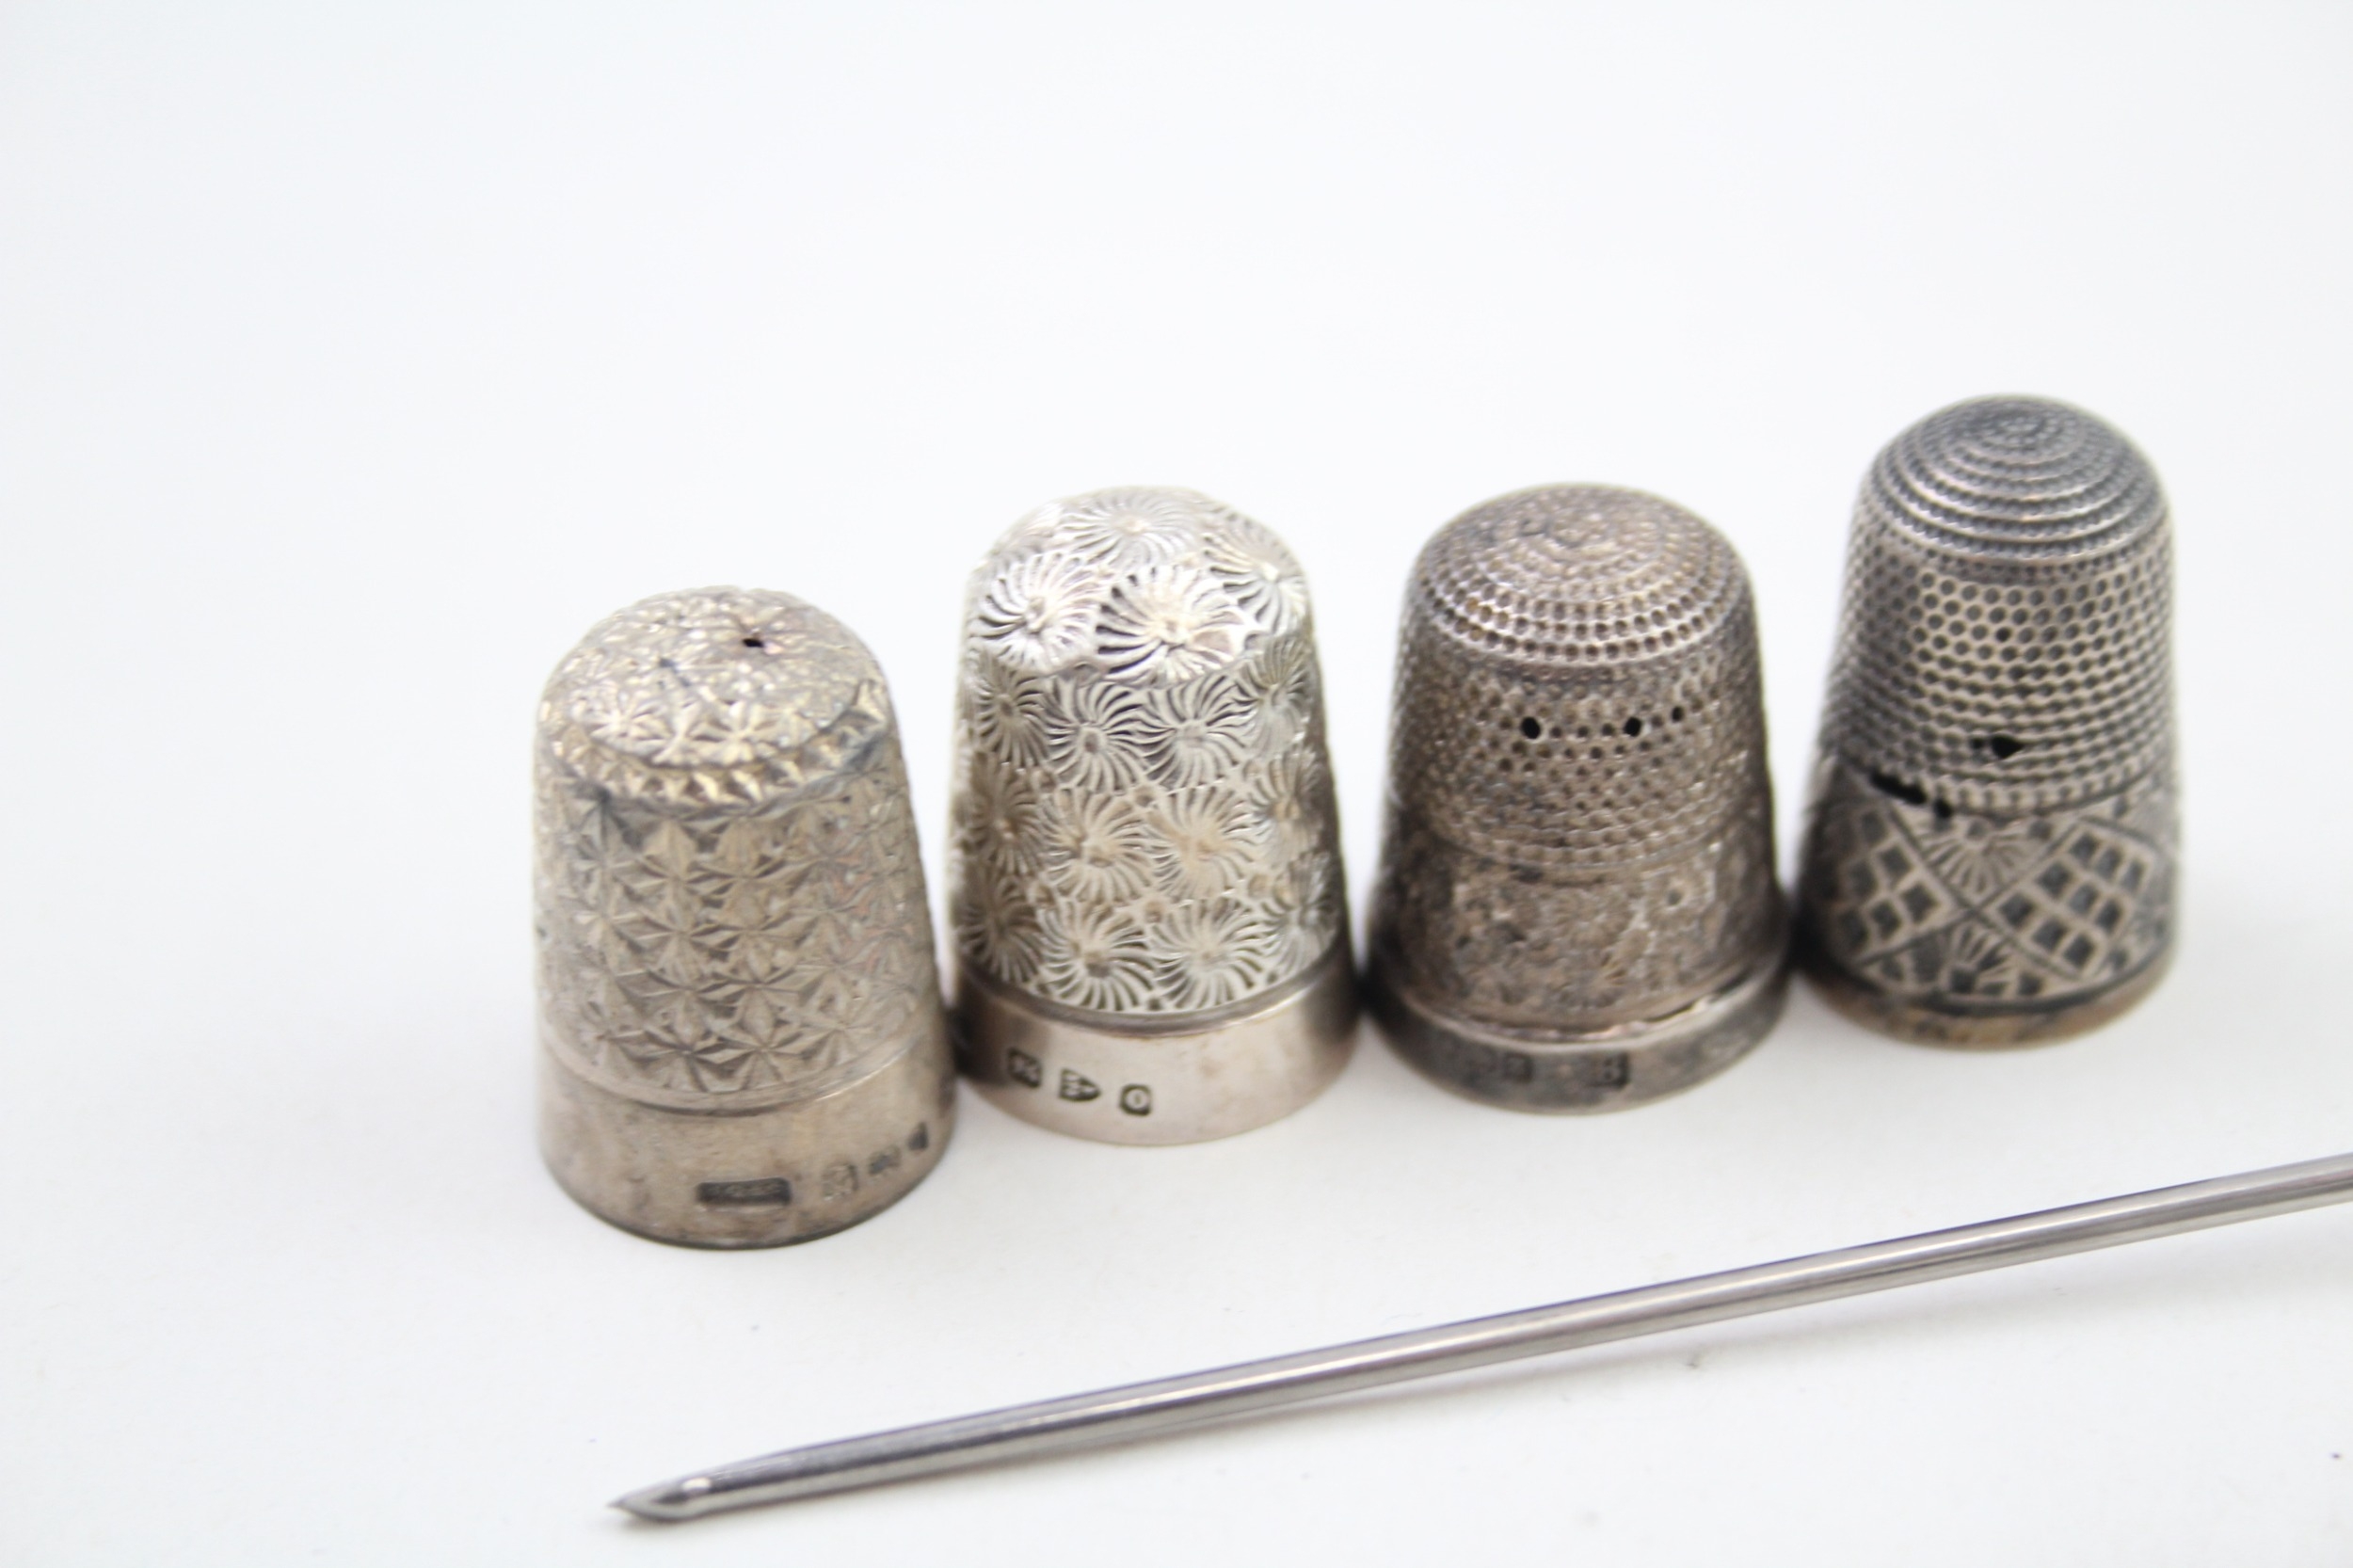 8 x .925 sterling thimbles & handled crochet hook - Image 2 of 6